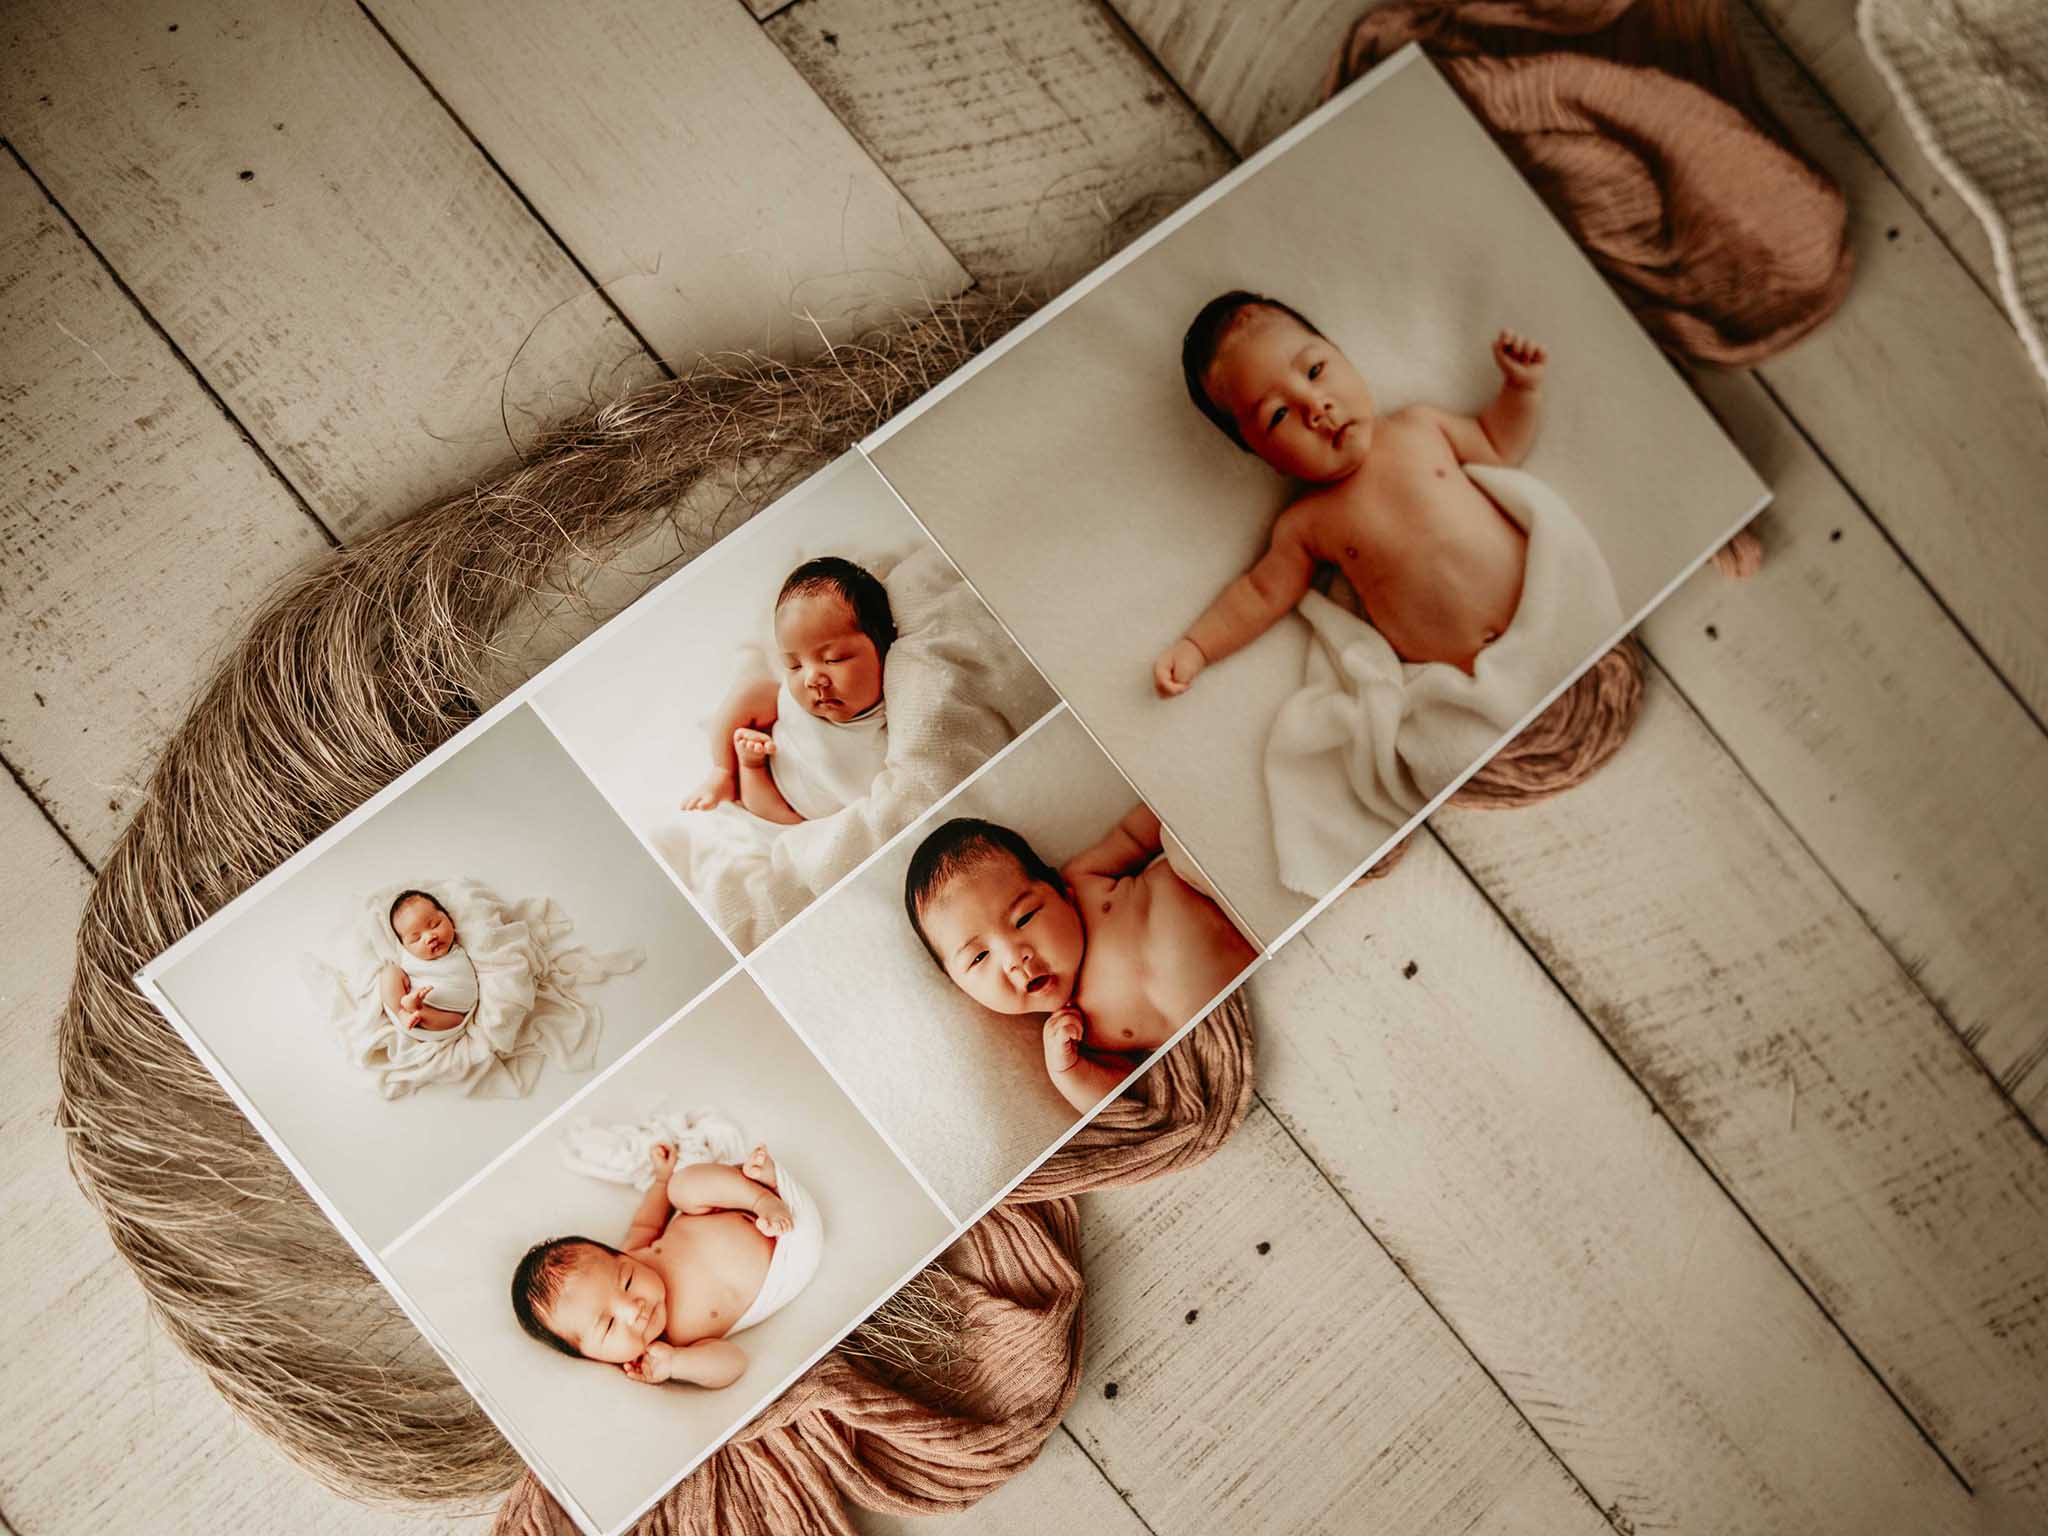 Tips for a Simple Inexpensive Setup for Newborn Photography